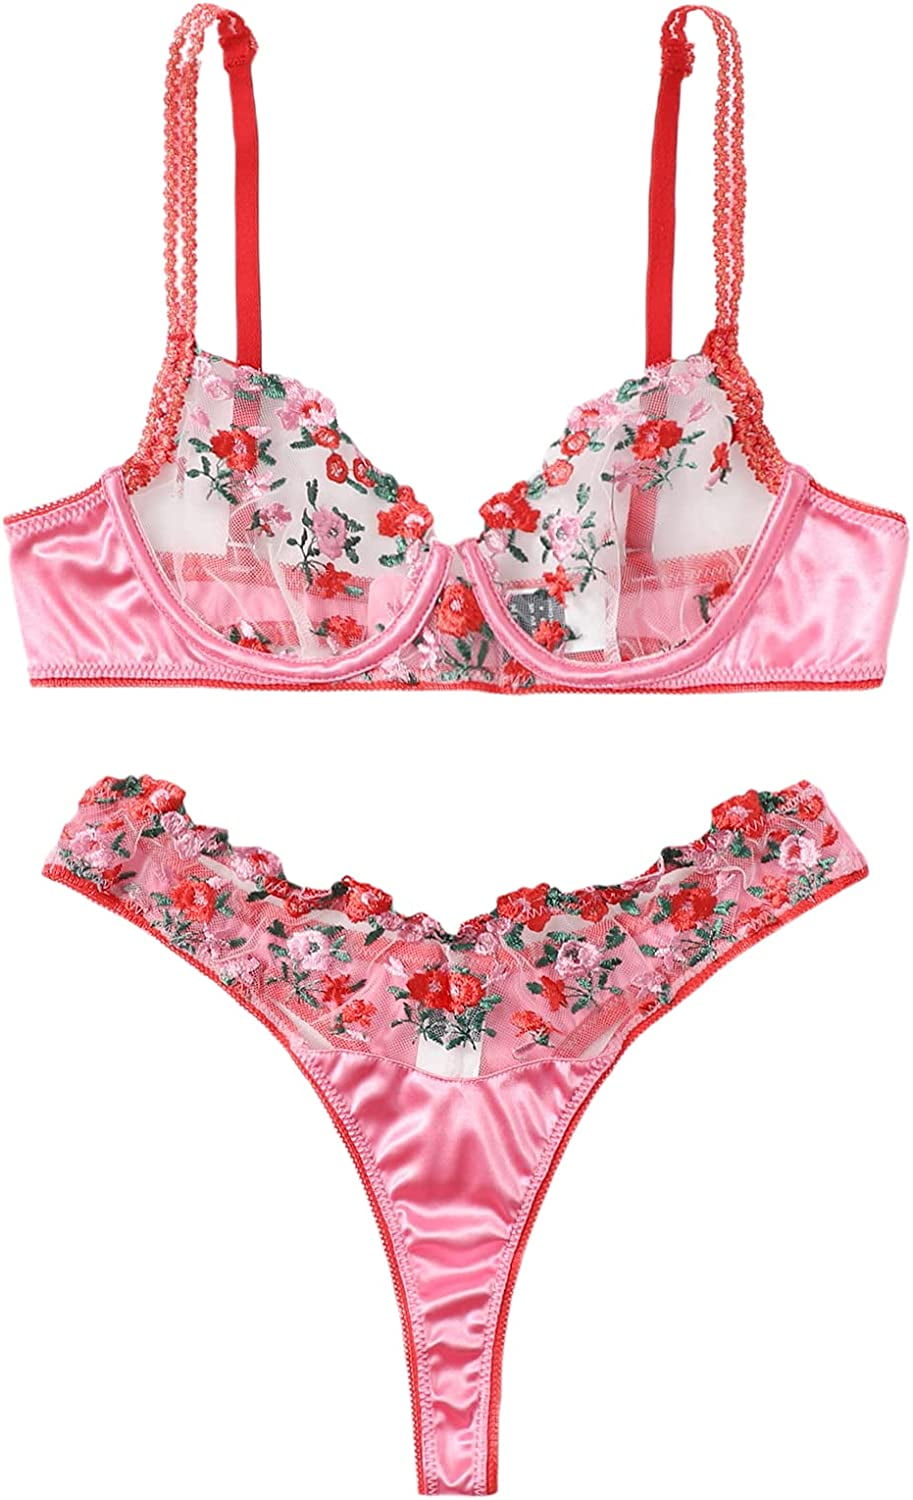 SOLY HUX Women's Sexy Sheer Mesh Floral Embroidery Lingerie Set Bra and ...